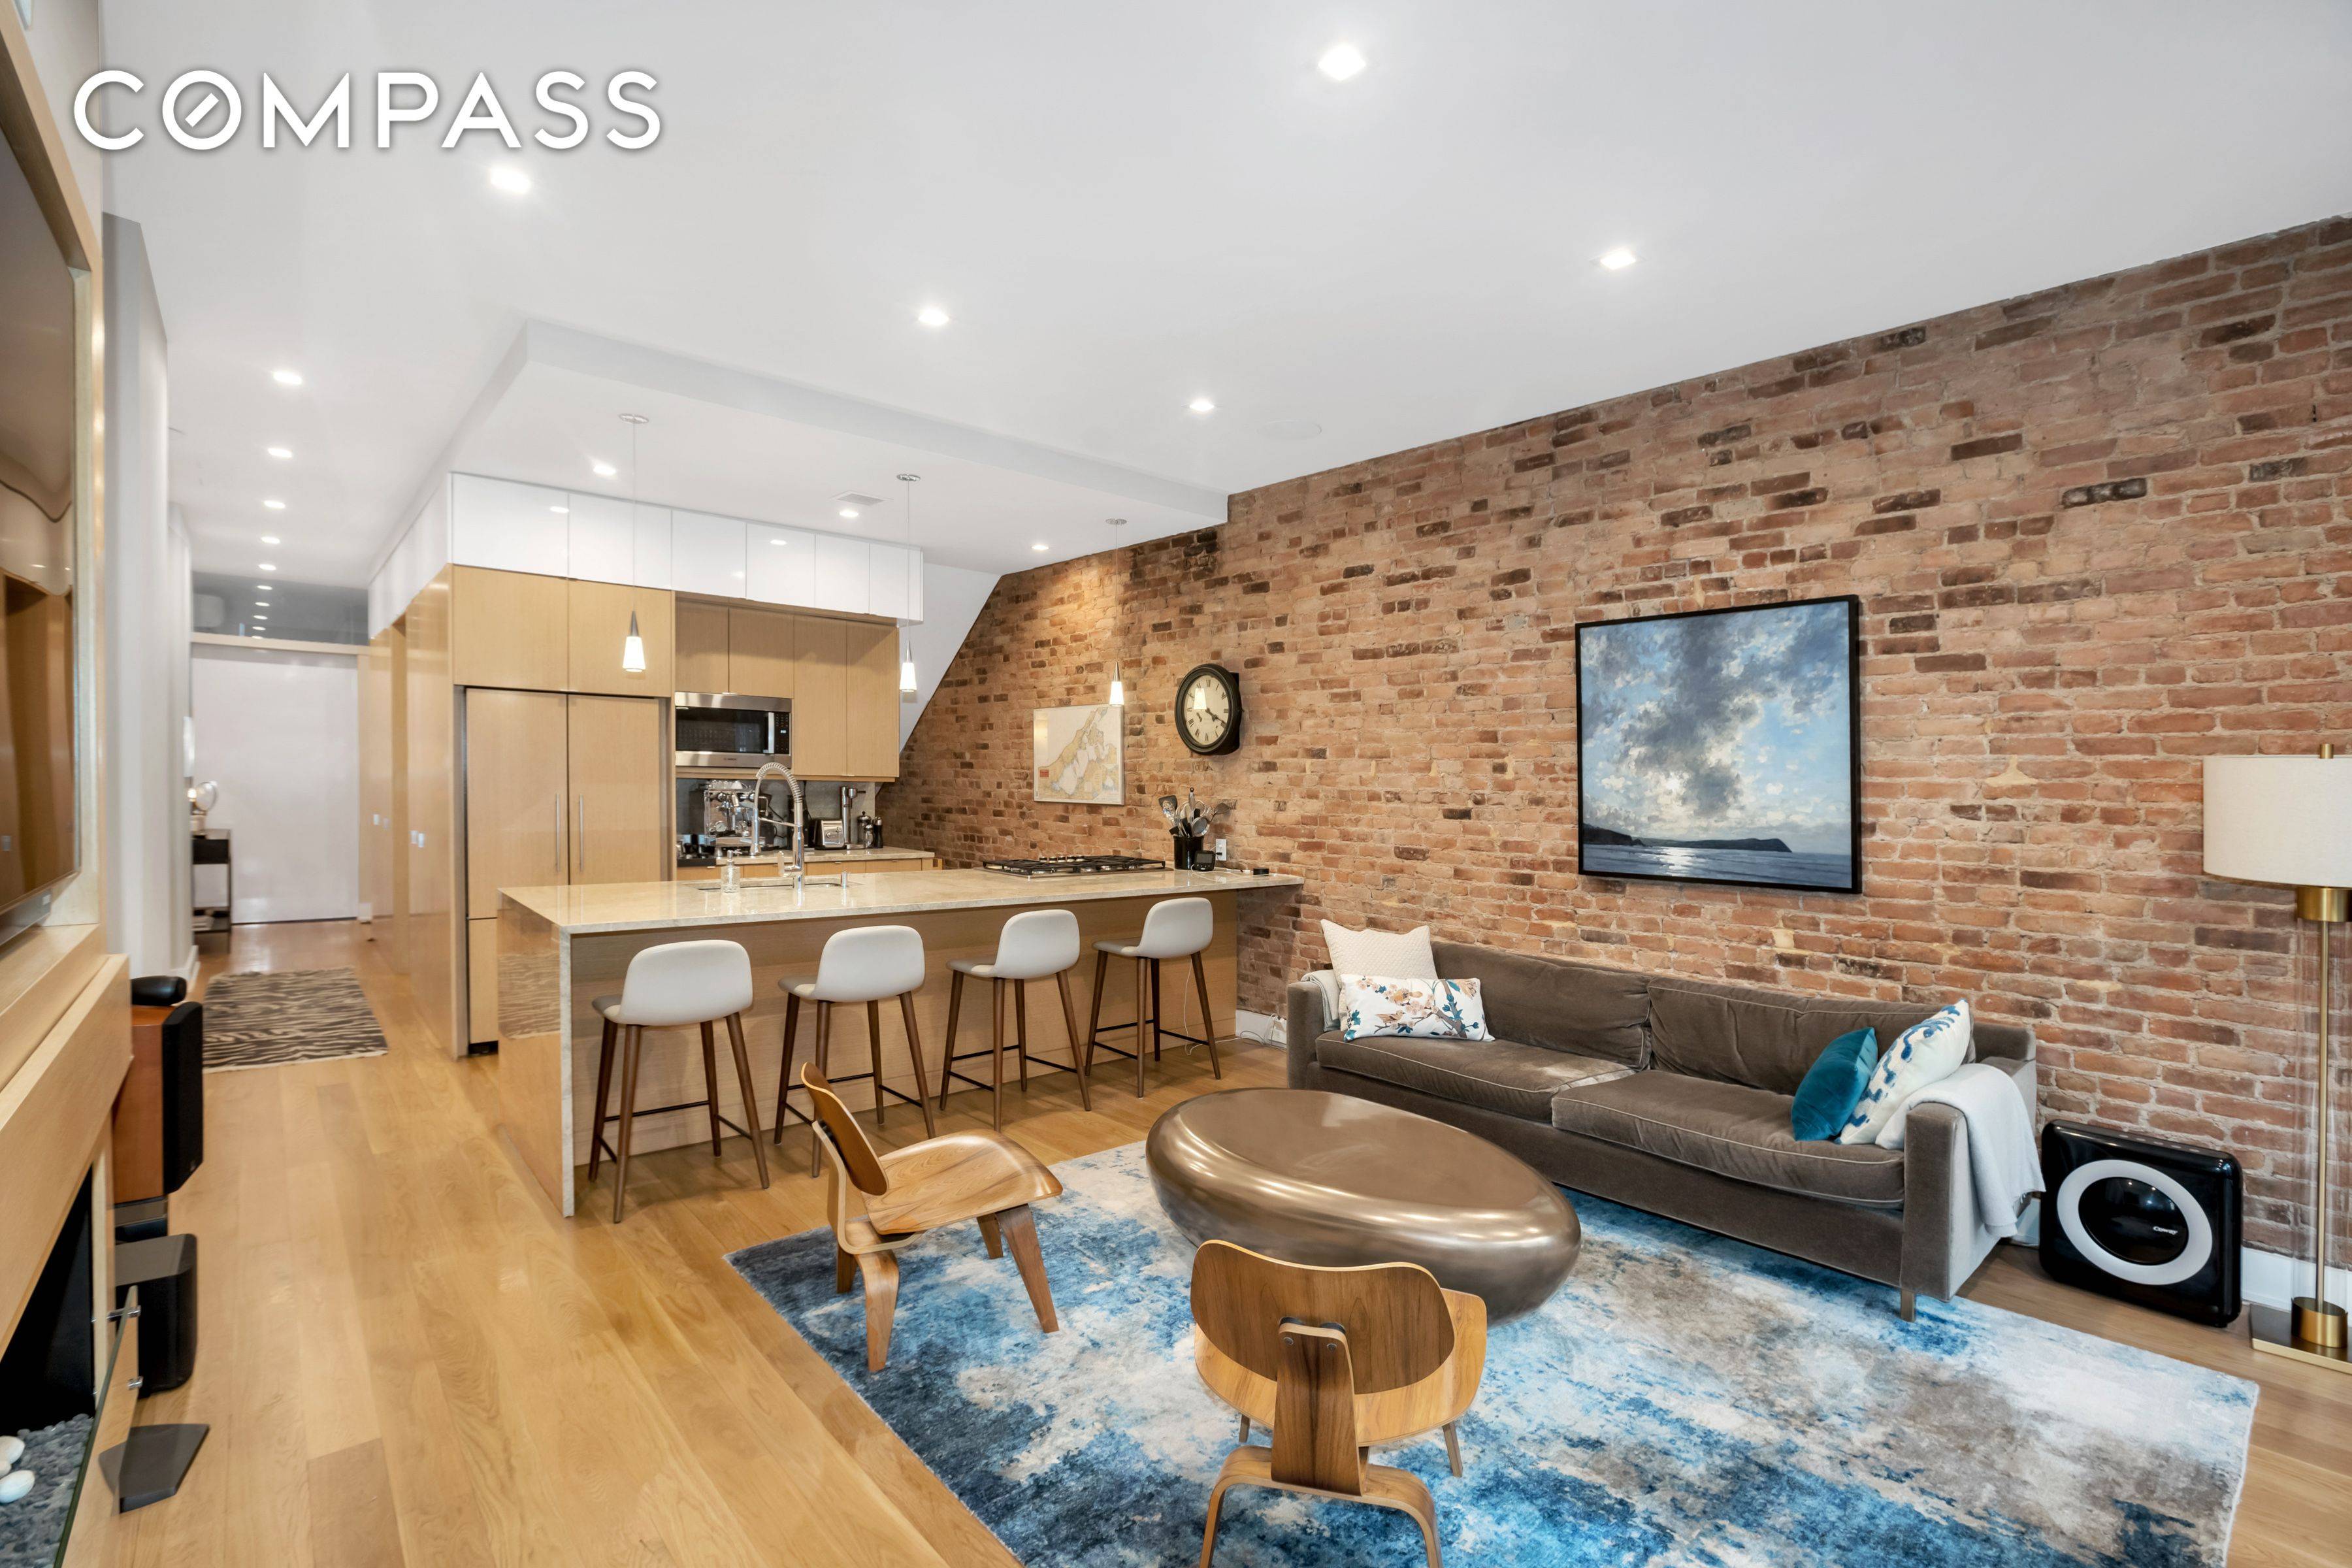 421 West 22nd Street, Unit One Condo Investor friendly Duplex unit with private garden Unit conveys with an 80 square foot storage unit Extraordinary indoor outdoor living and breathtaking designer ...